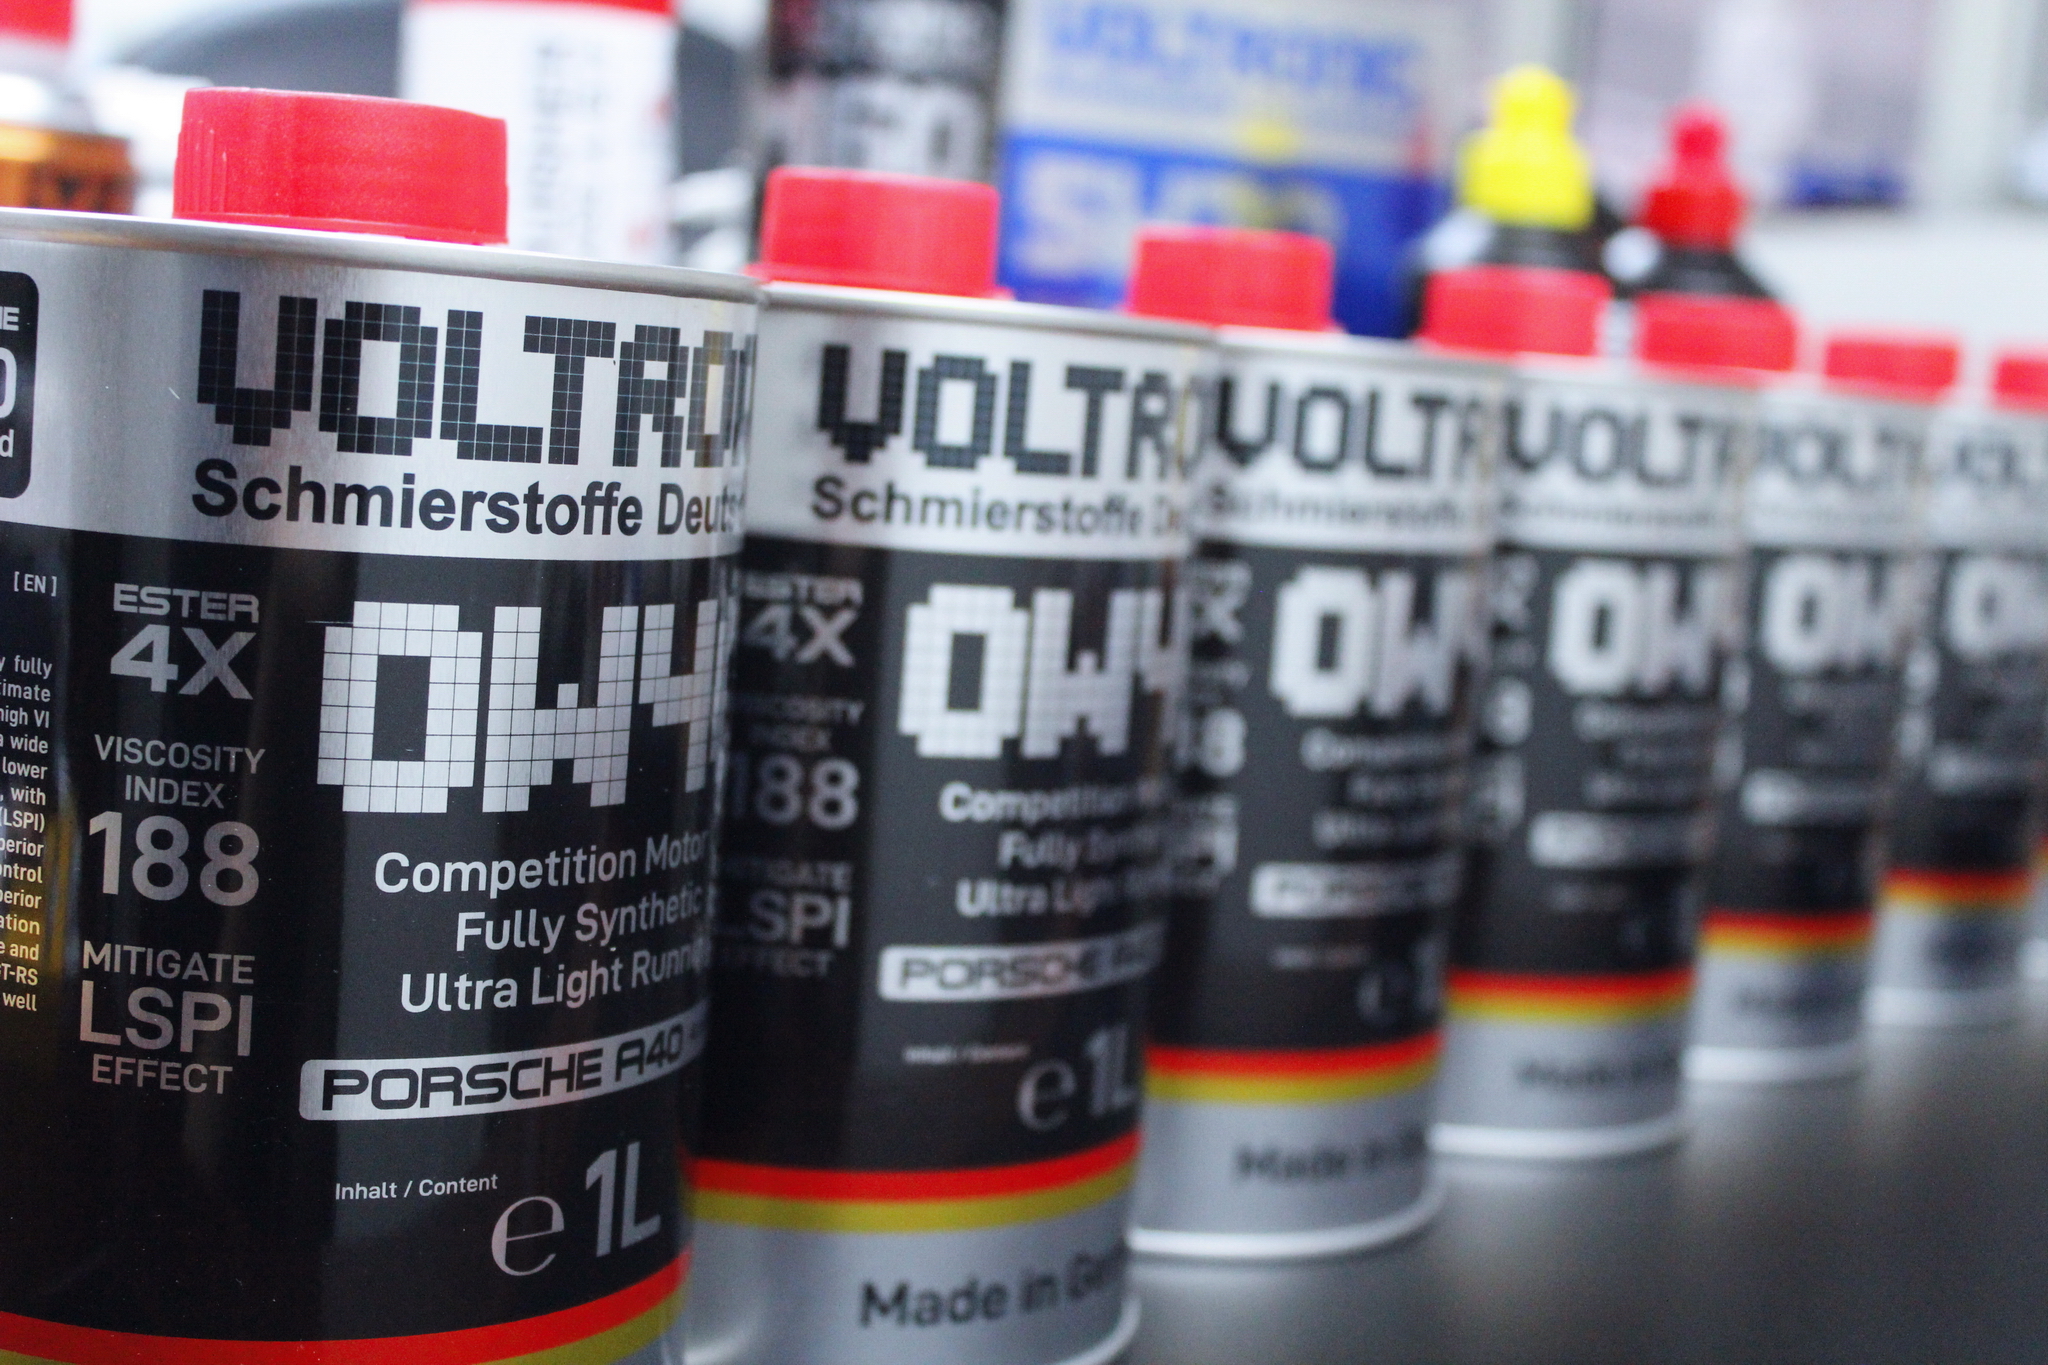 VOLTRONIC 0W40 GT-RS Motor Oil